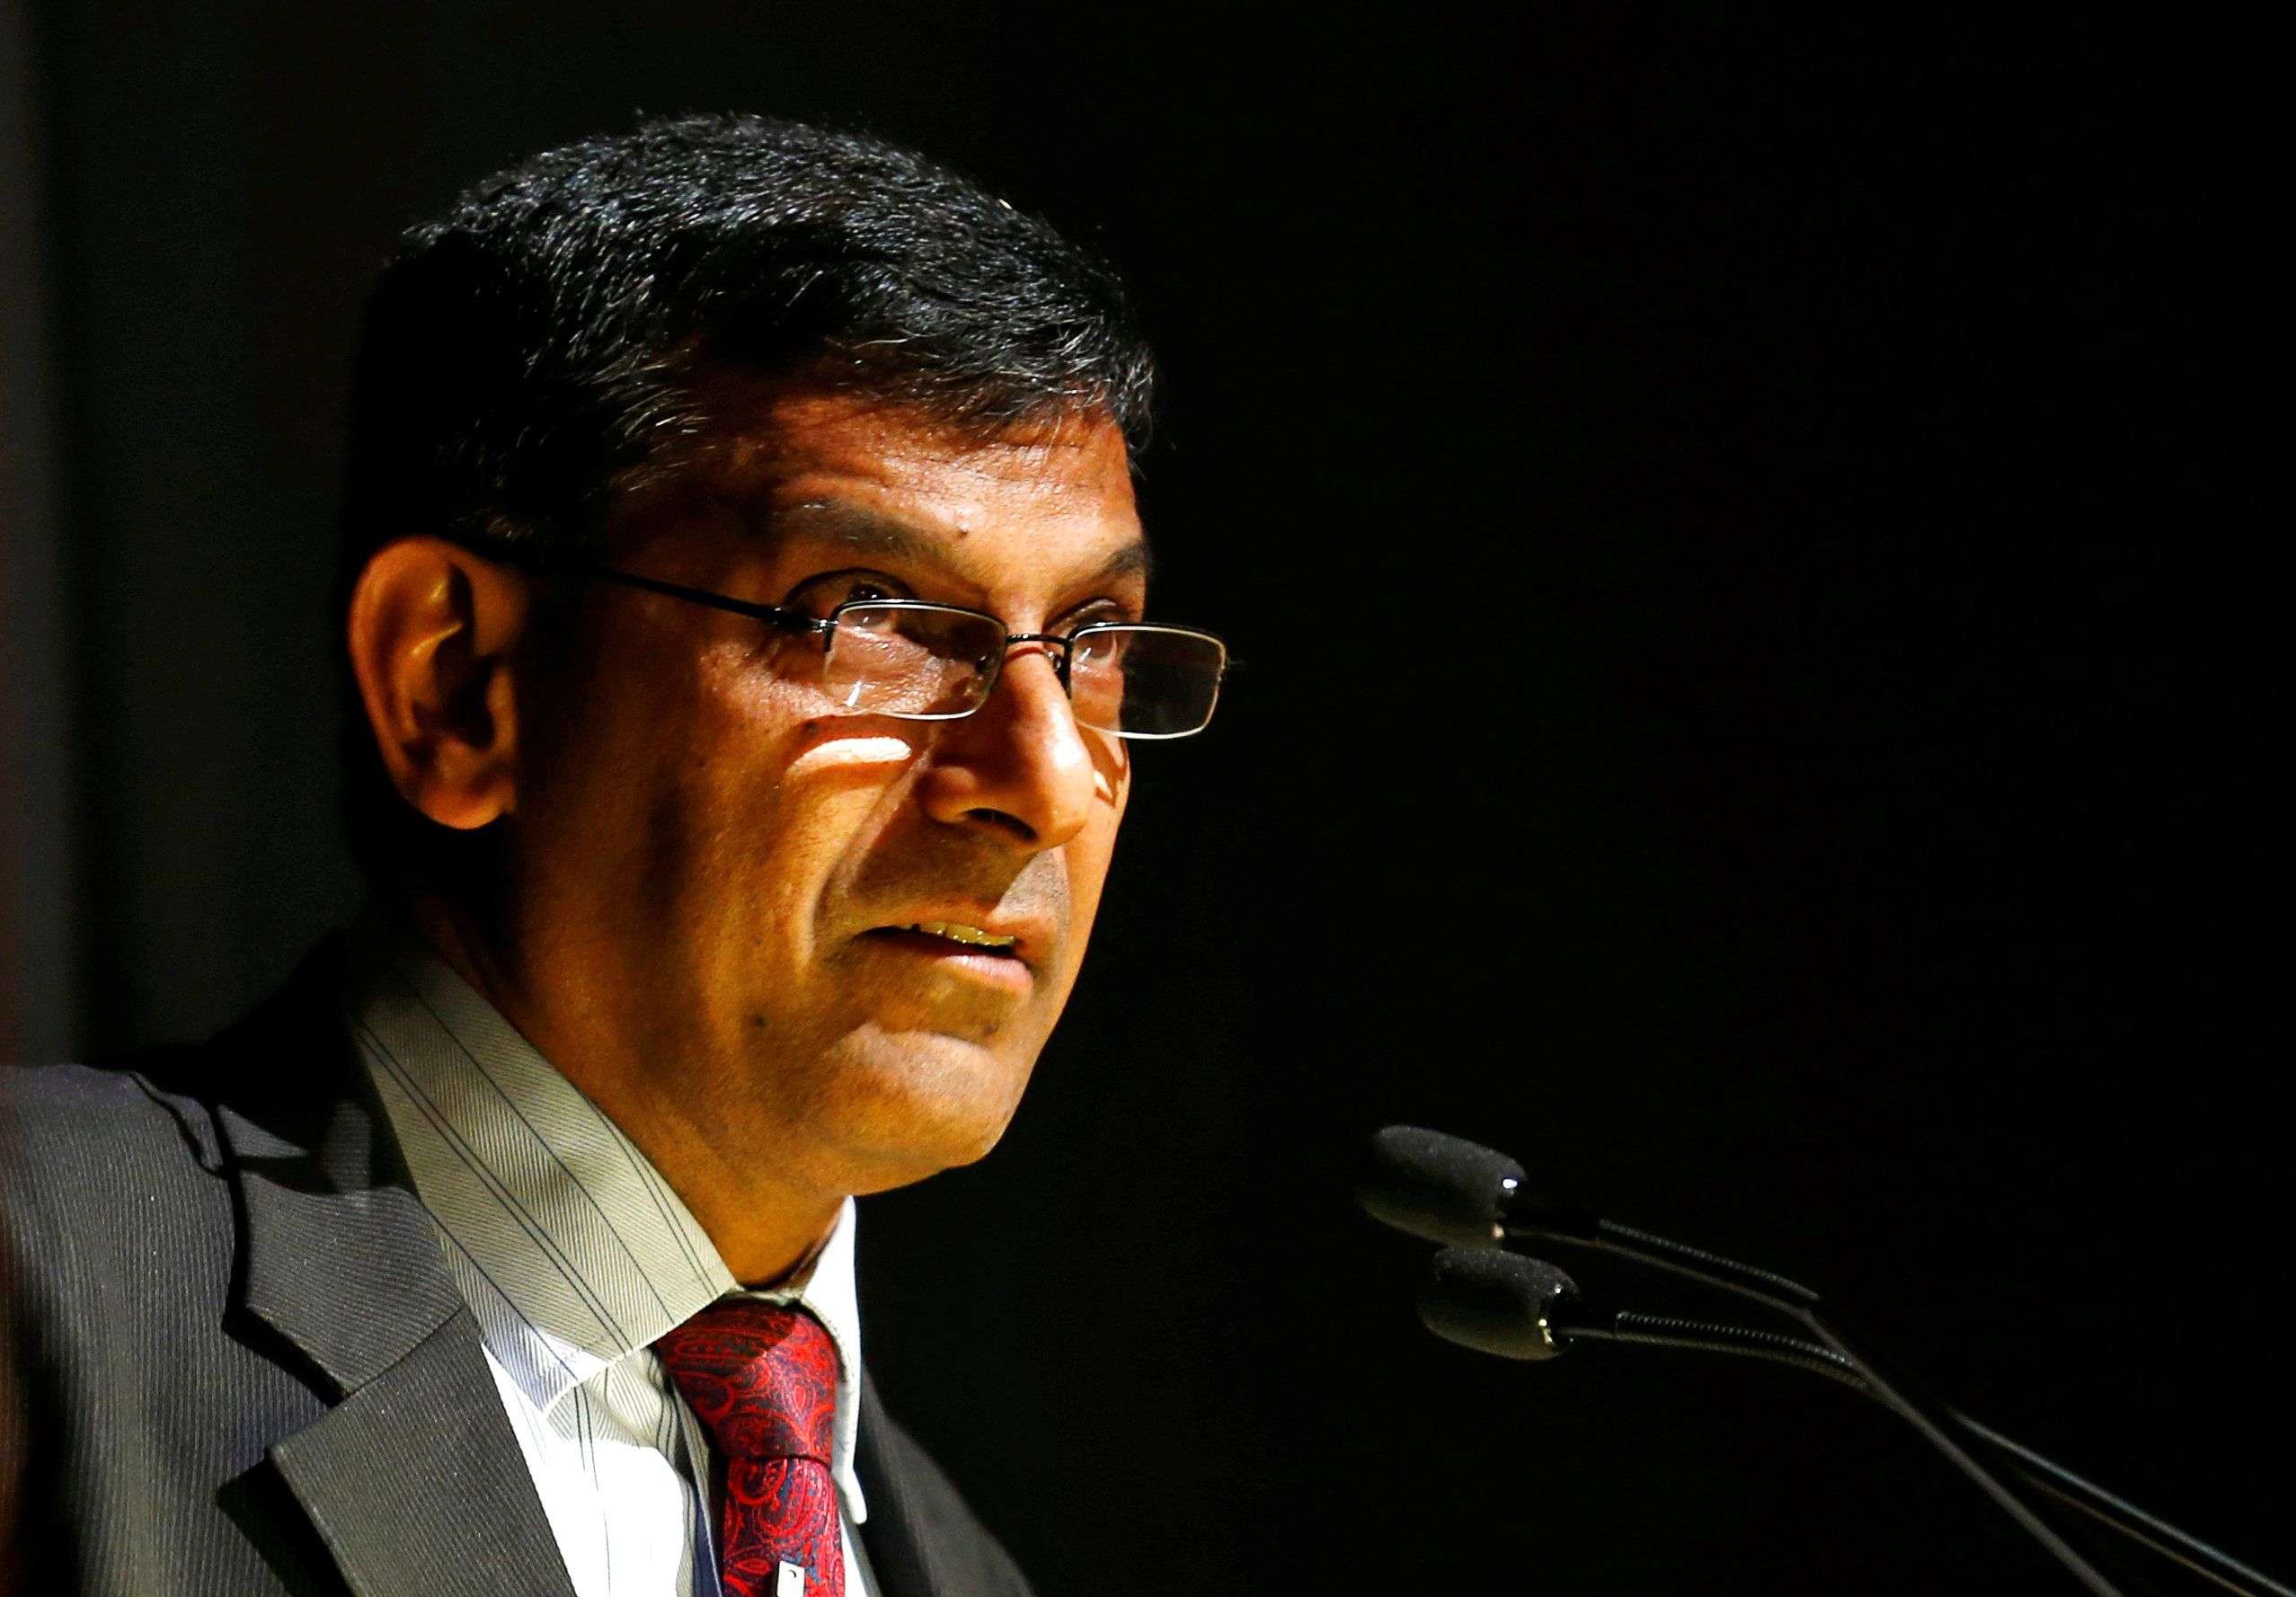 RBI Governor Rajan delivers a lecture at Tata Institute of Fundamental Research in Mumbai